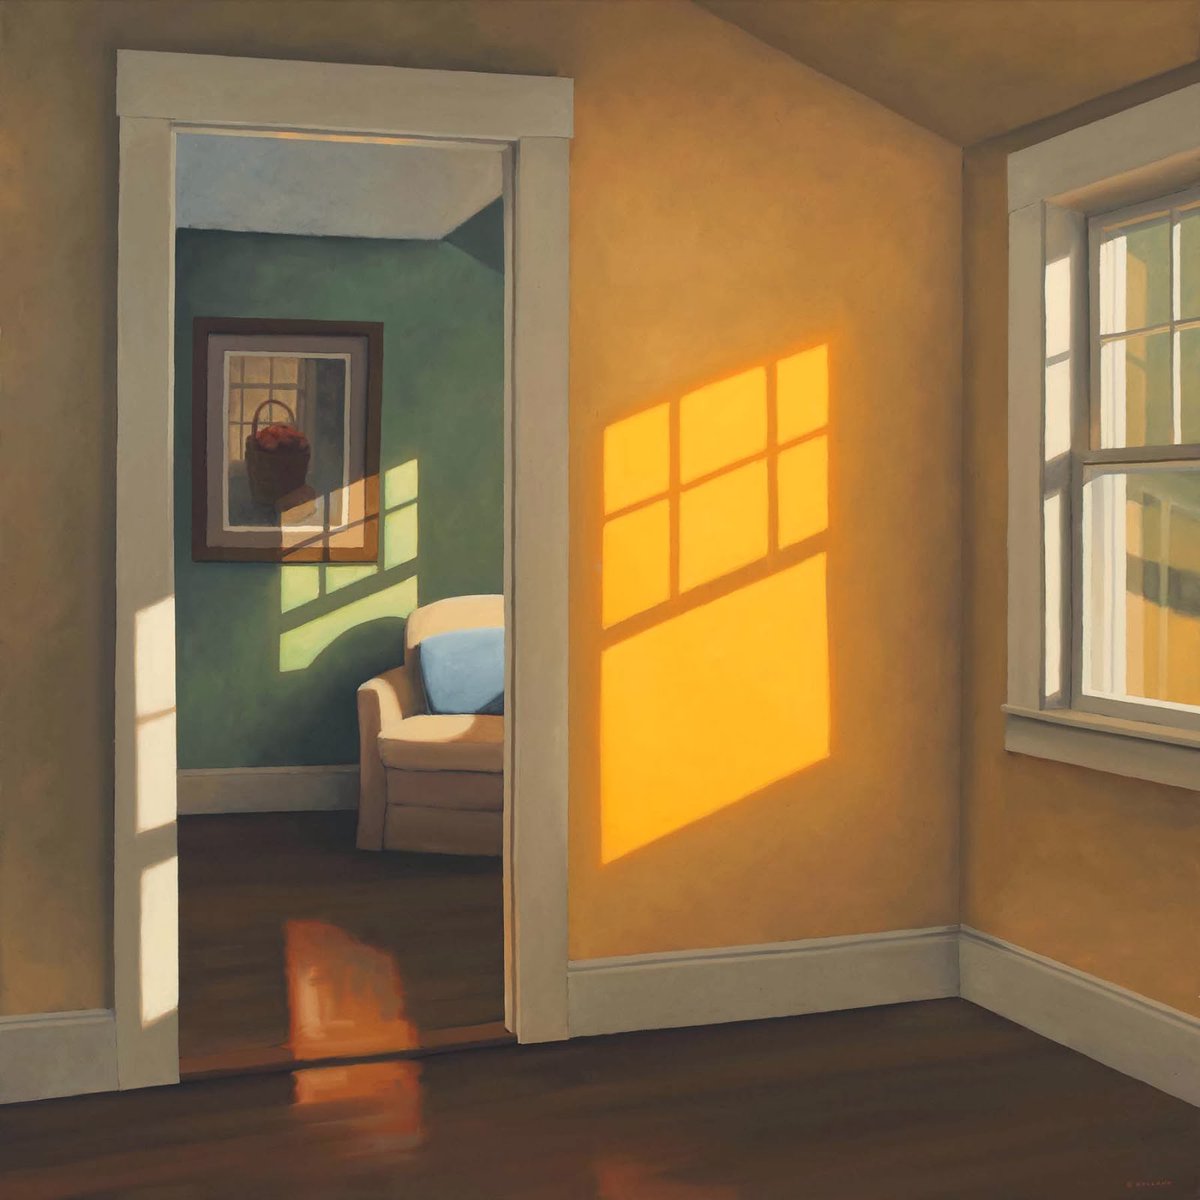 Interiors by American painter Jim Holland, 2000s-10s, whose quiet oils are inspired by Edward Hopper and the qualities of light found around his Cape Cod home